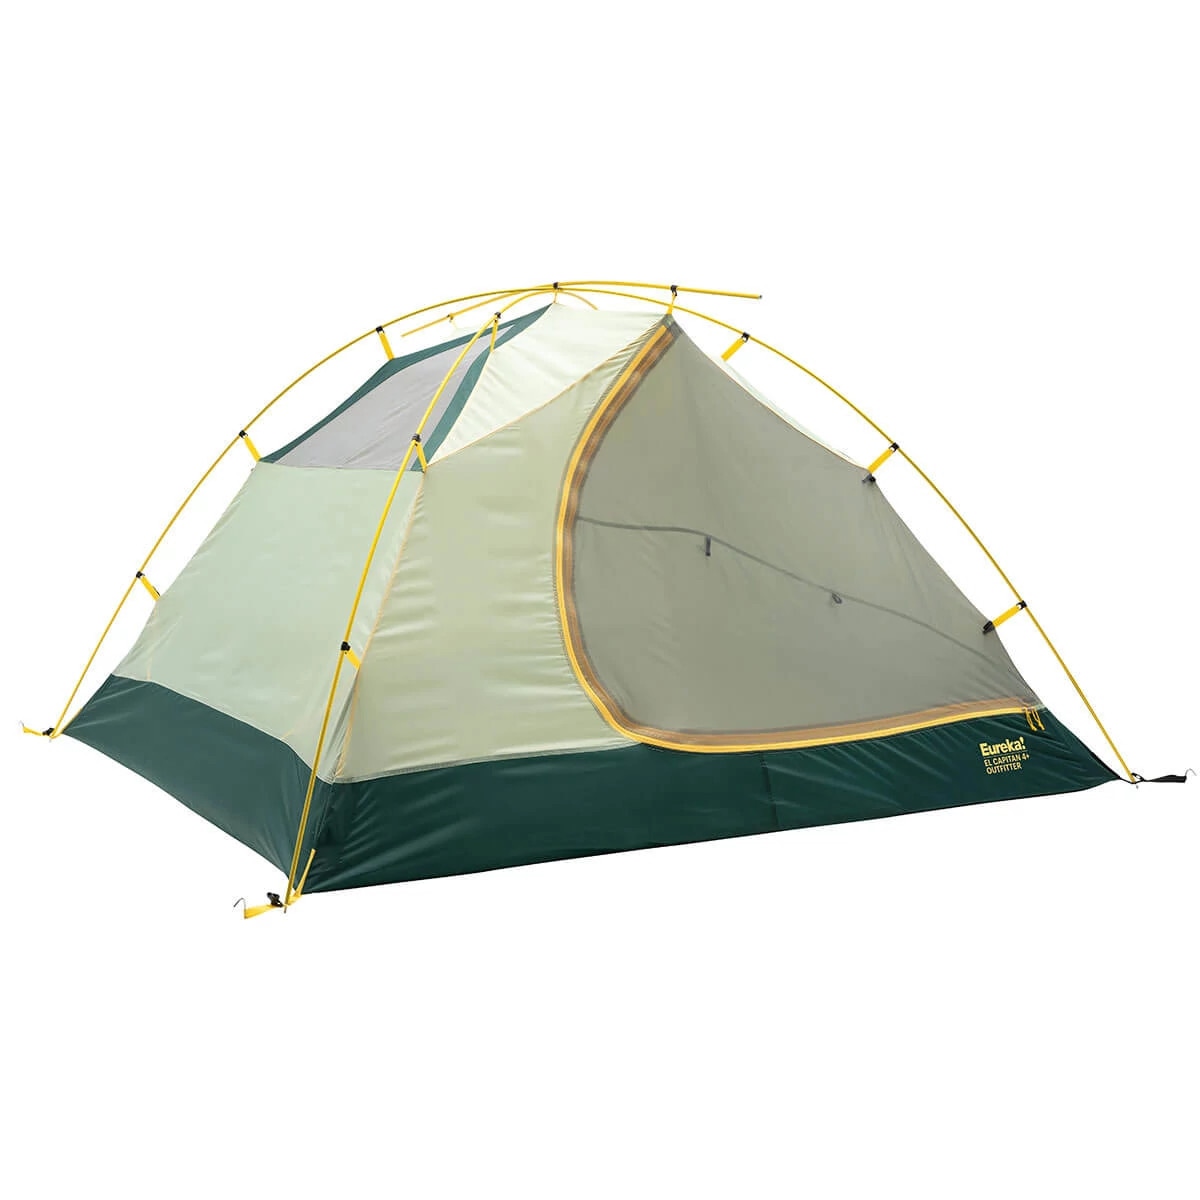 El Capitan 4+ Outfitter 4 Person Tent